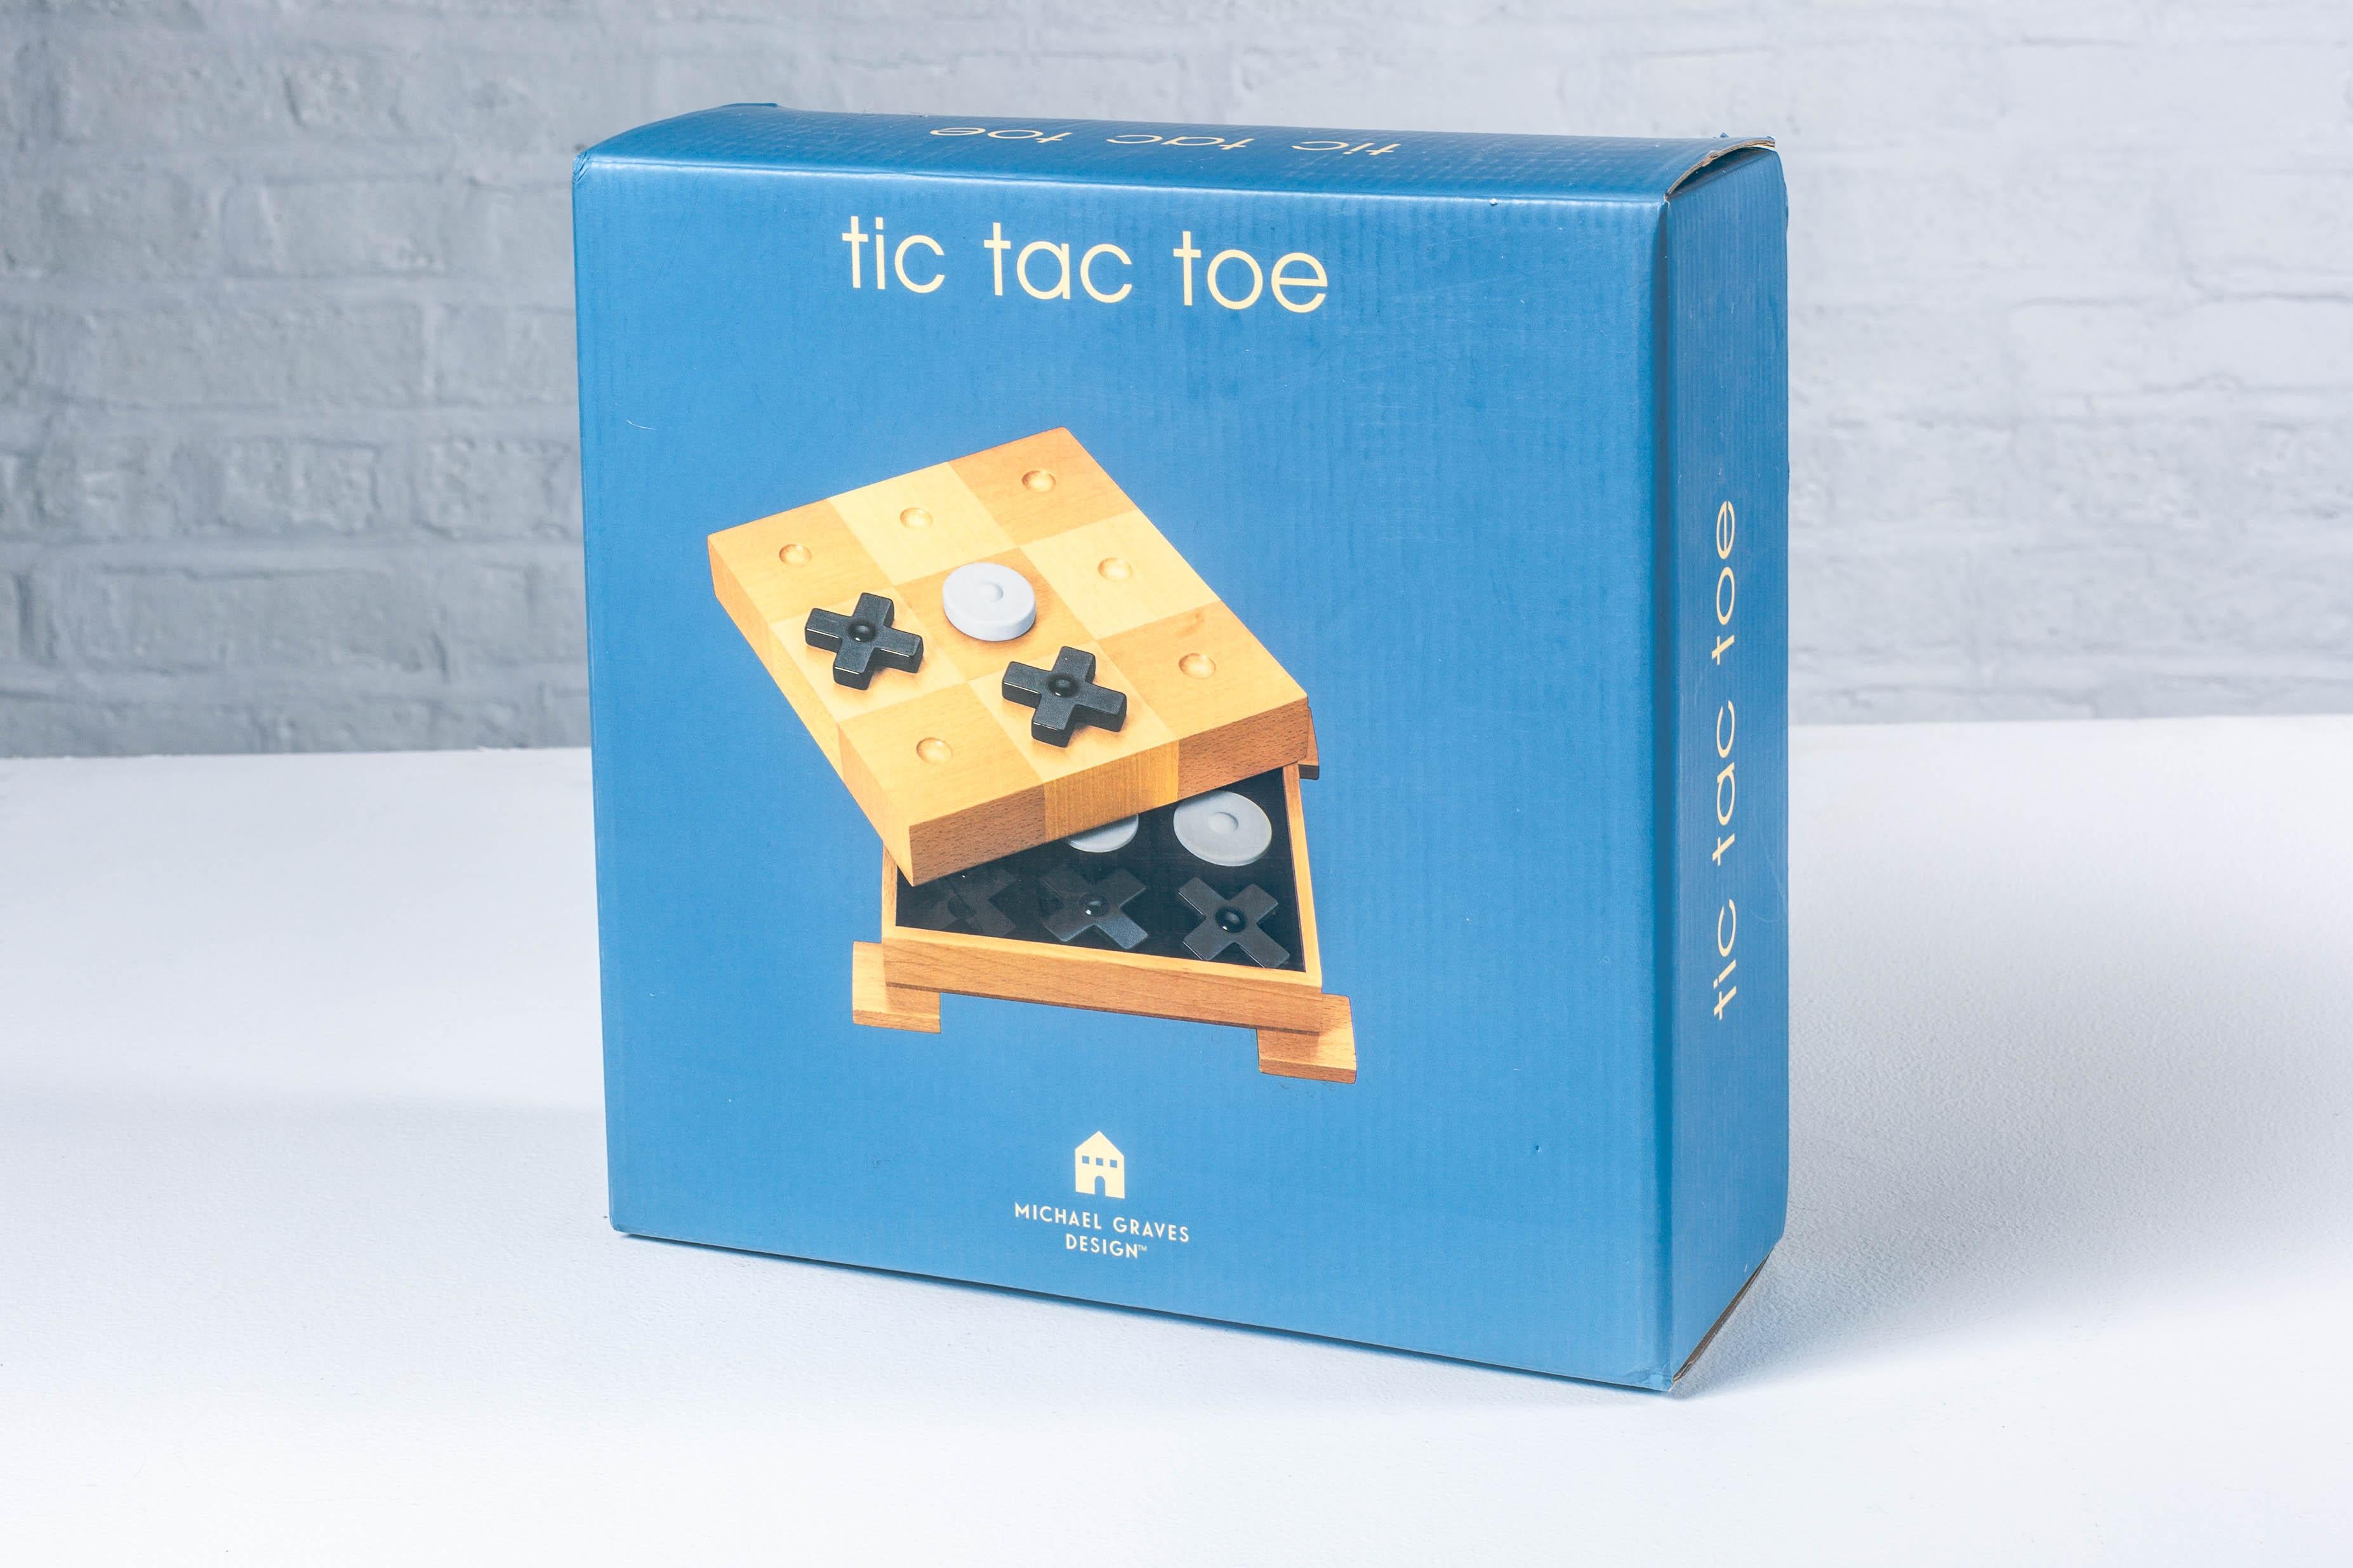 Designed by Michael Graves, this Tic Tac Toe board game has an elegant and strong postmodern style. The checkered board stands on 4 square feet giving the game the look of a monument on pedestals. The board serves has a box containing all the